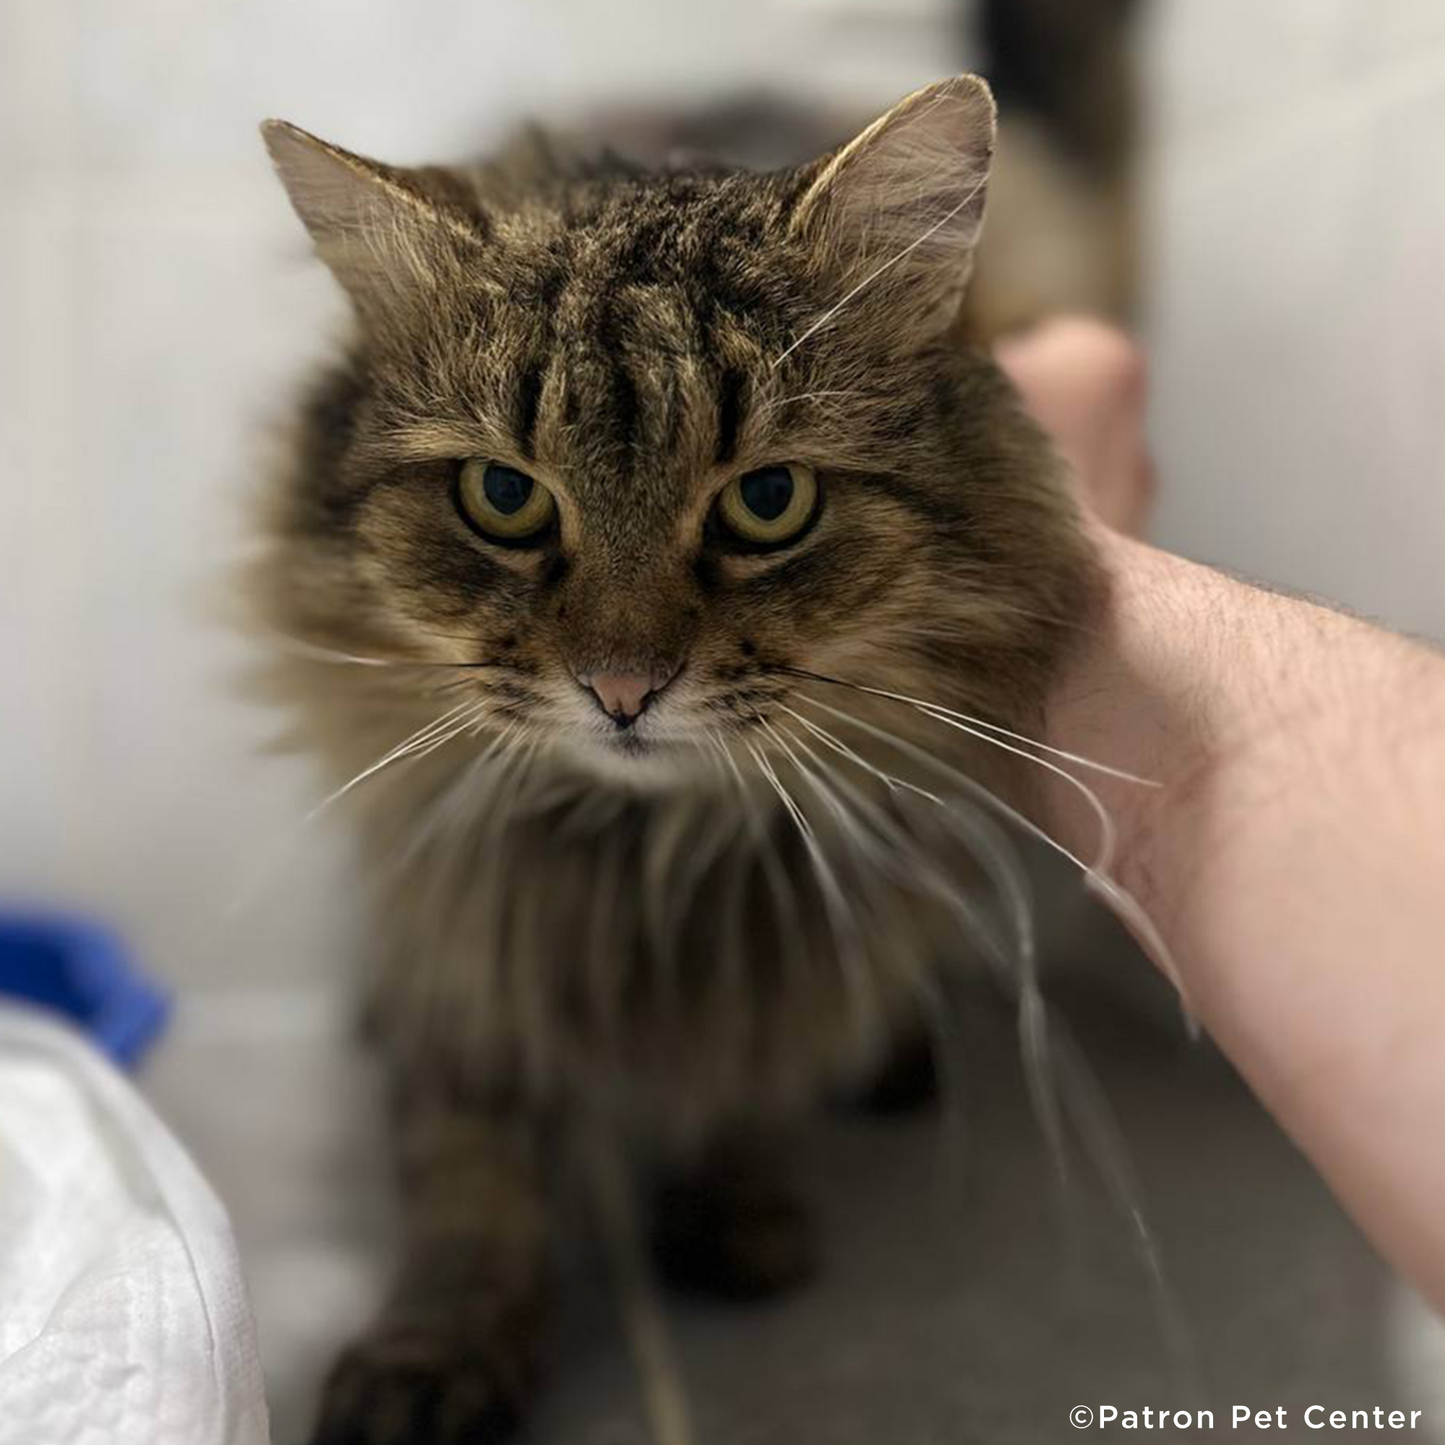 Help Abandoned Cat Overcome Excruciating Pain